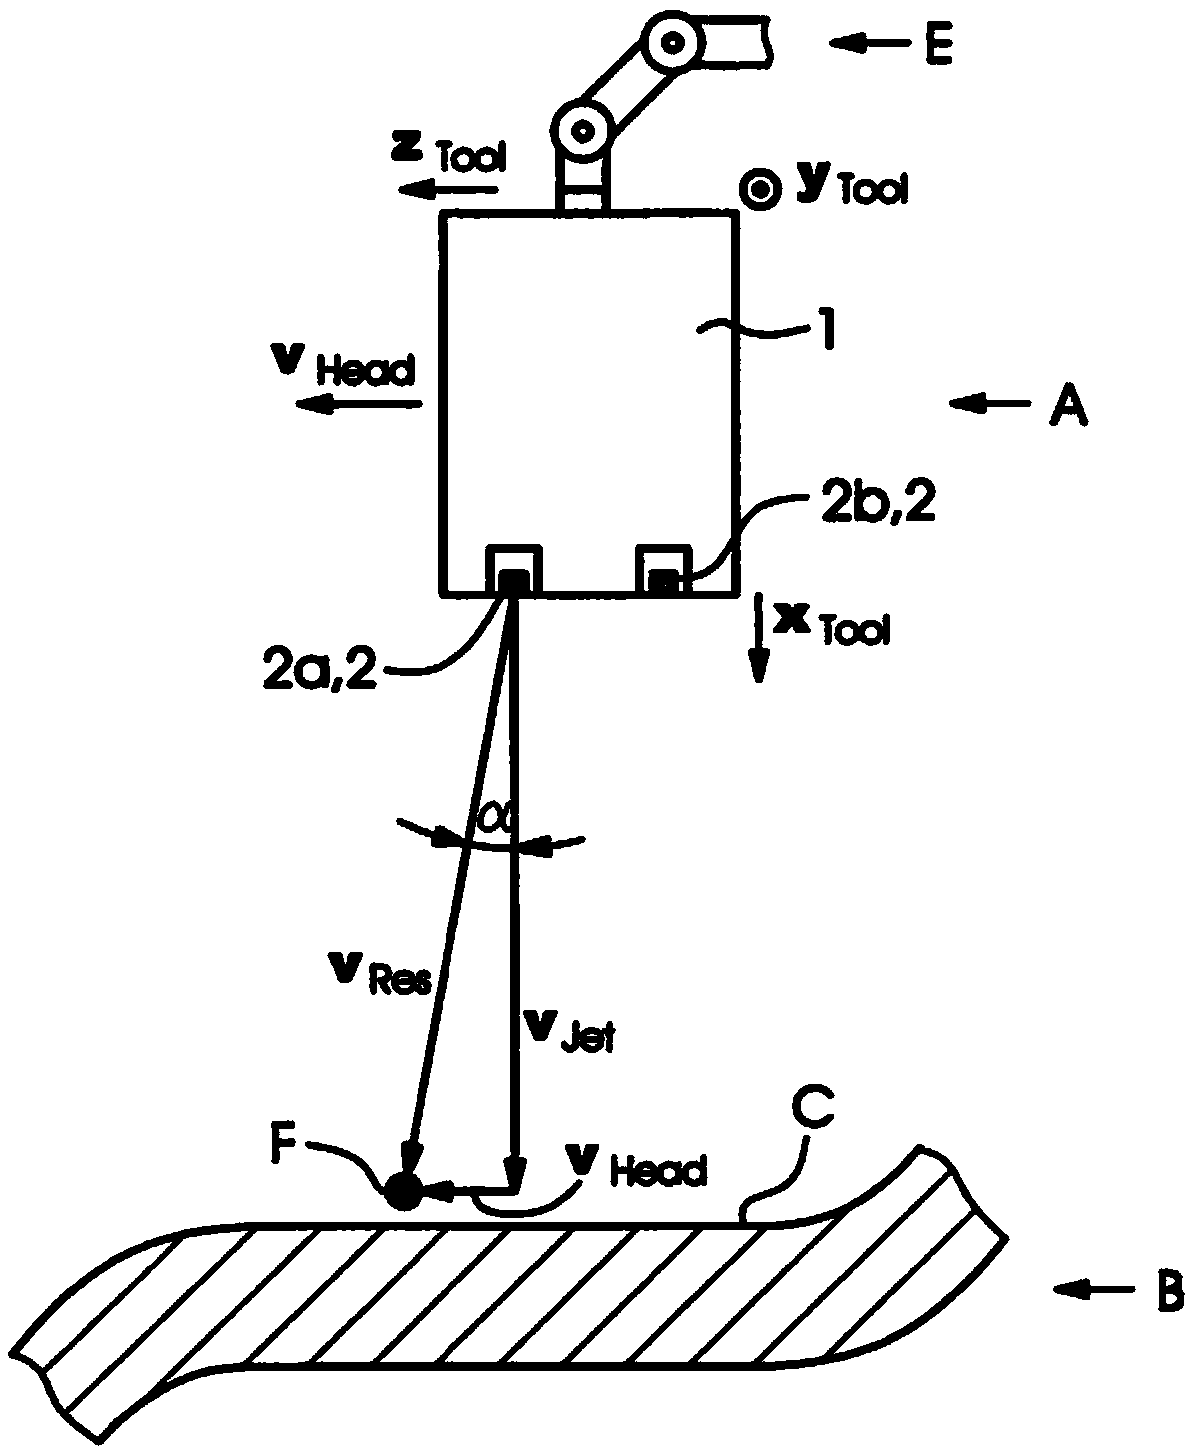 Apparatus for printing on a curved surface of an object through an ink jet print head